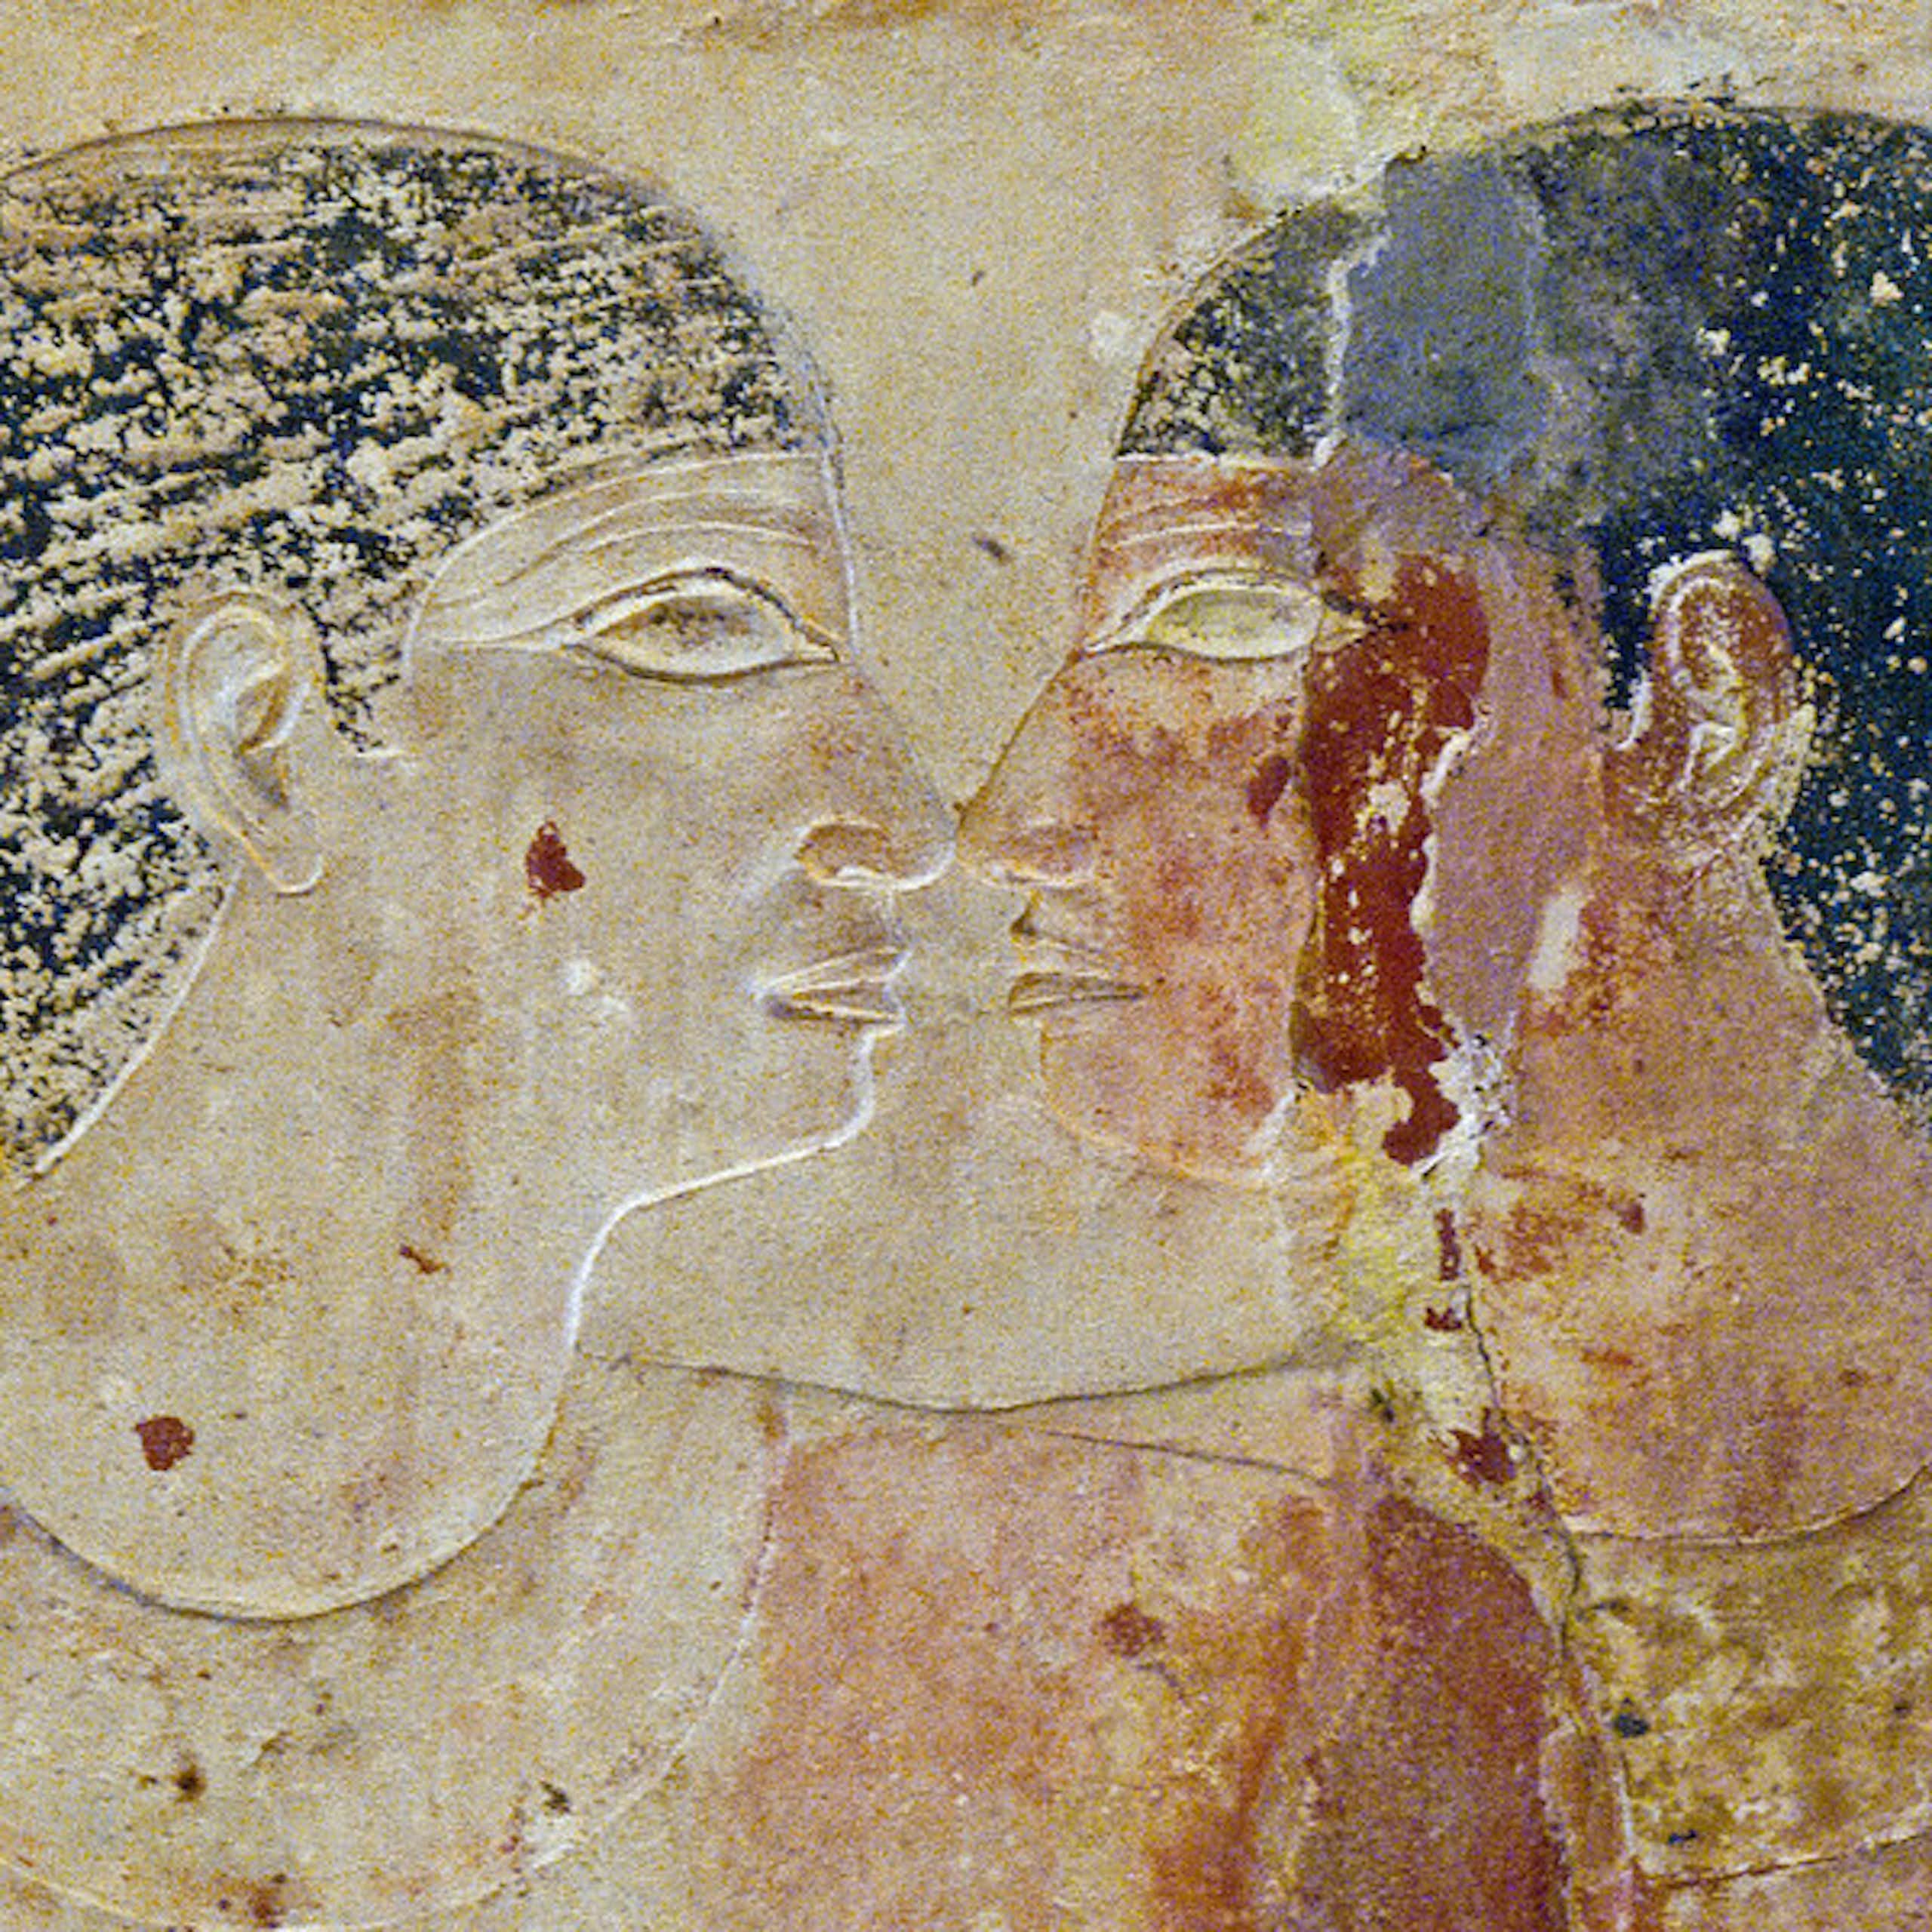 A faded mural depicting two men looking into each other's eyes with their faces very close to each other.